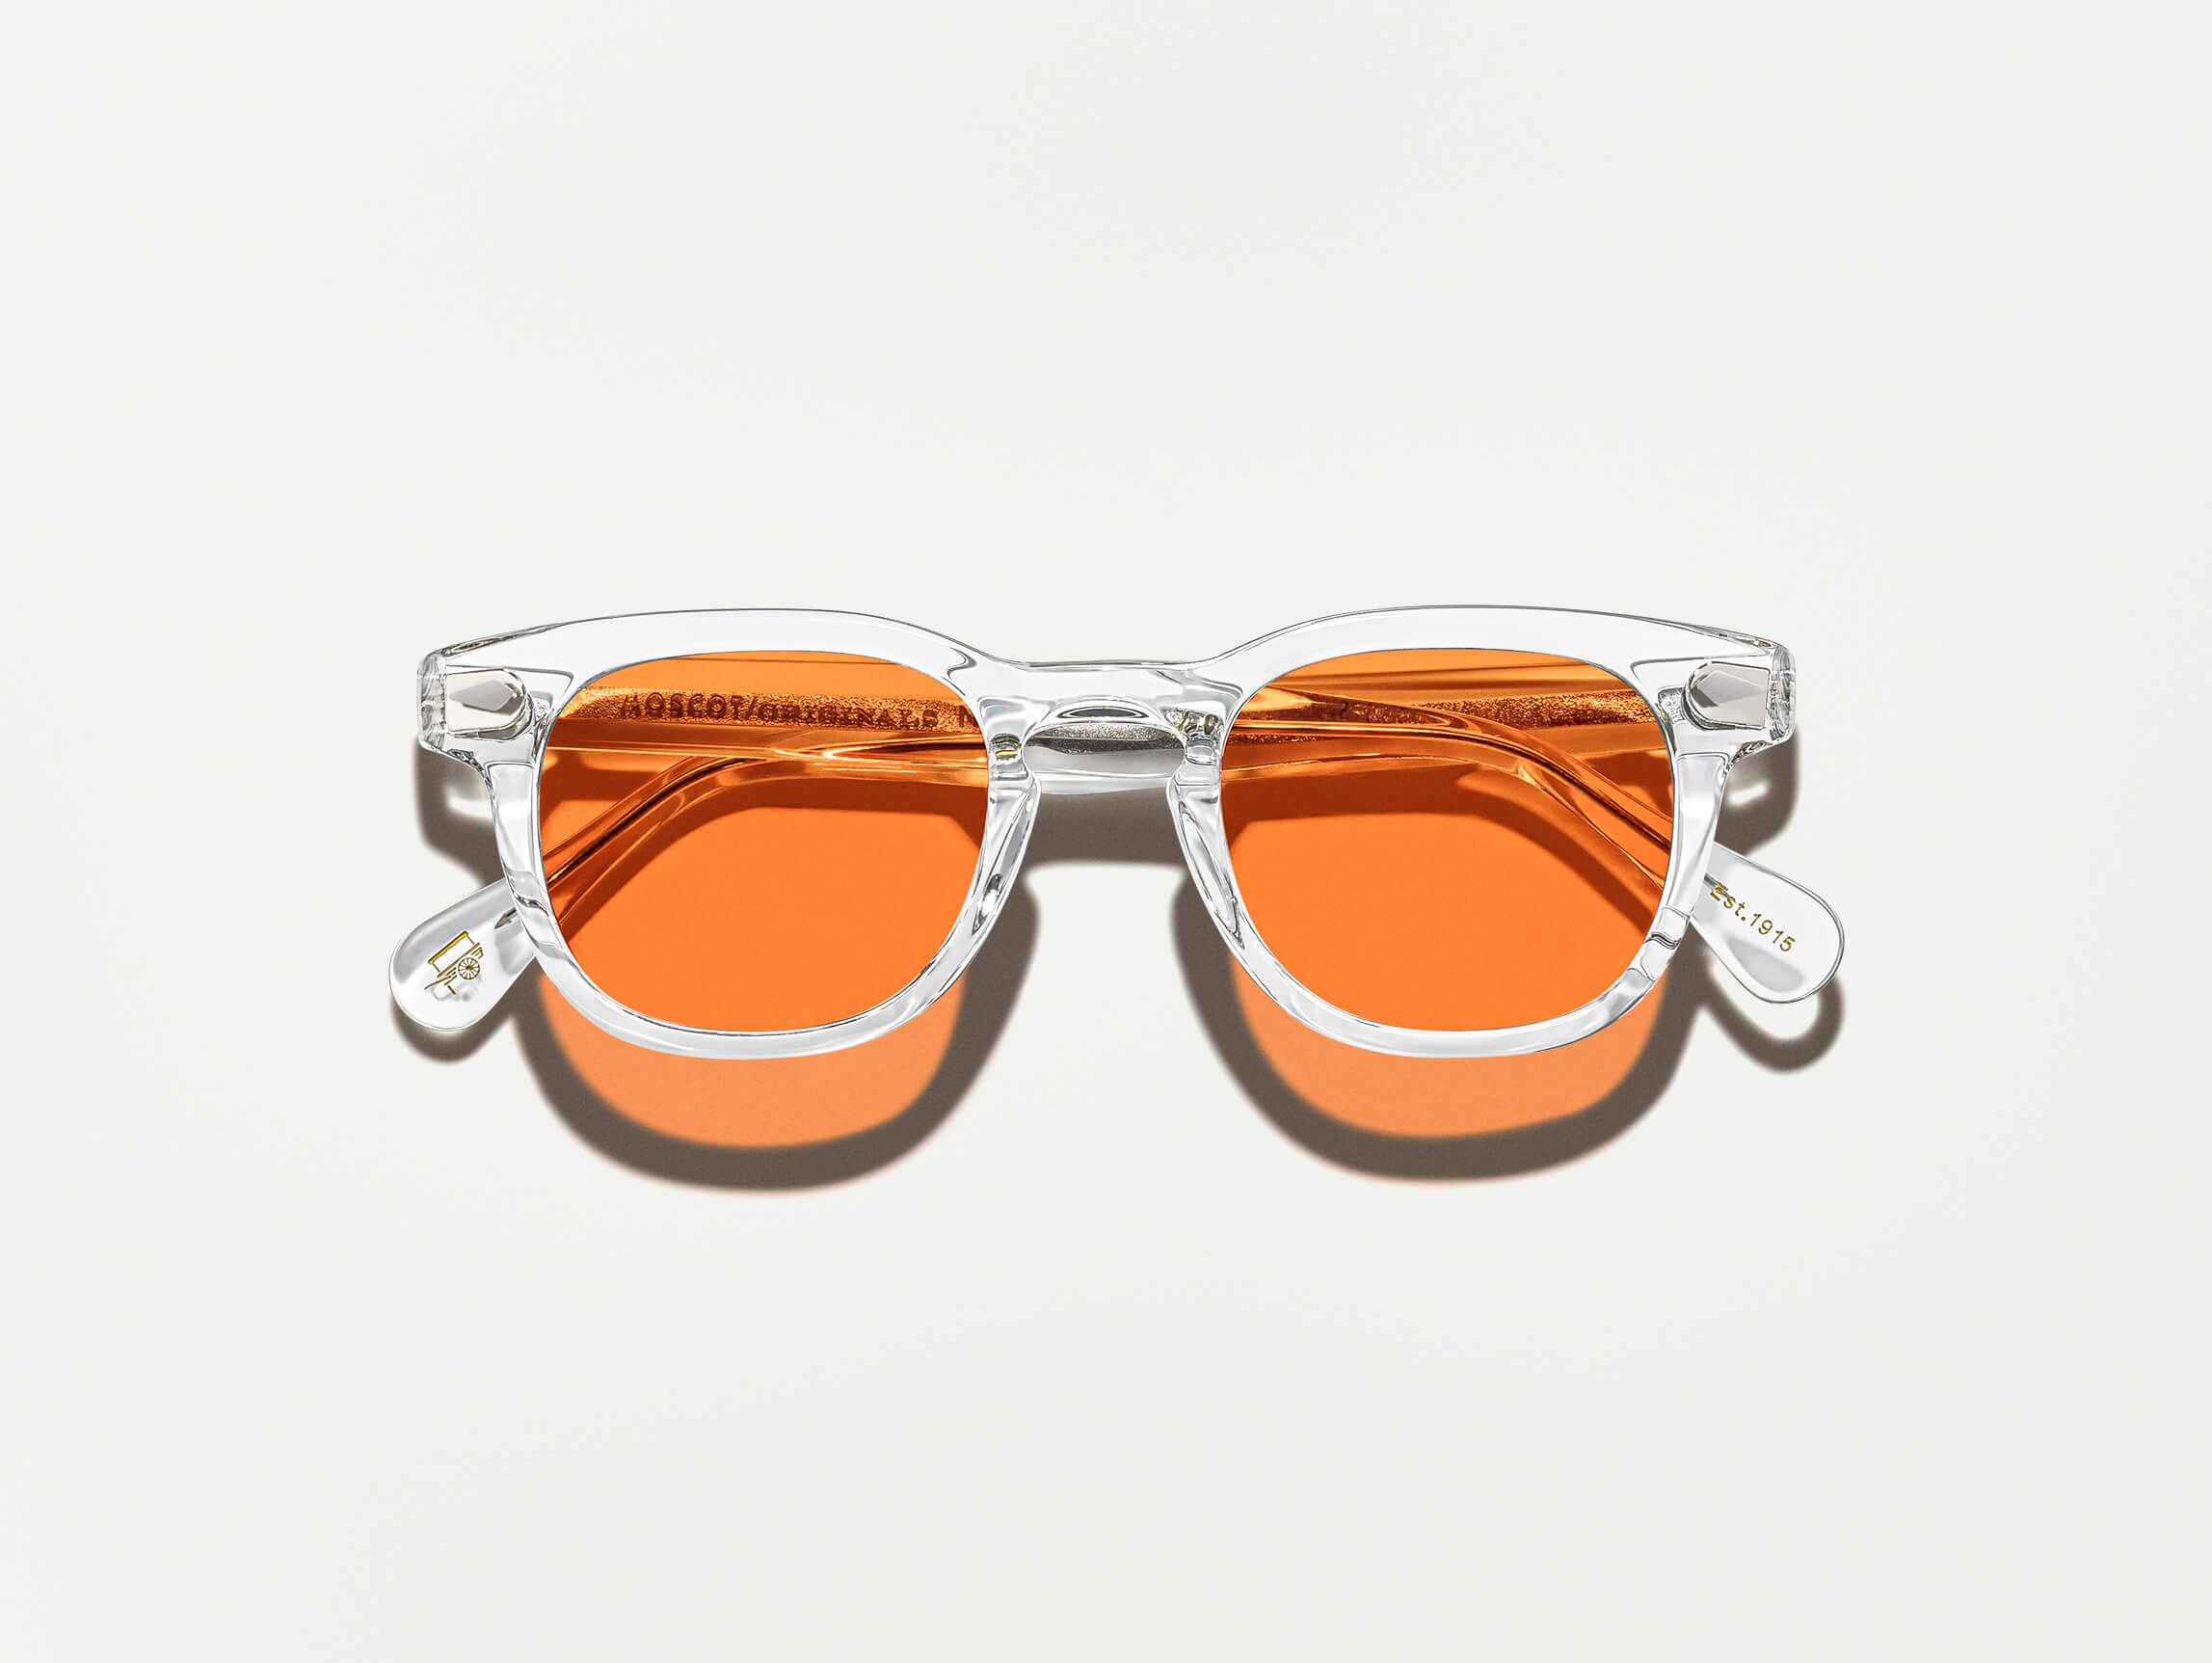 The GELT Crystal with Woodstock Orange Tinted Lenses